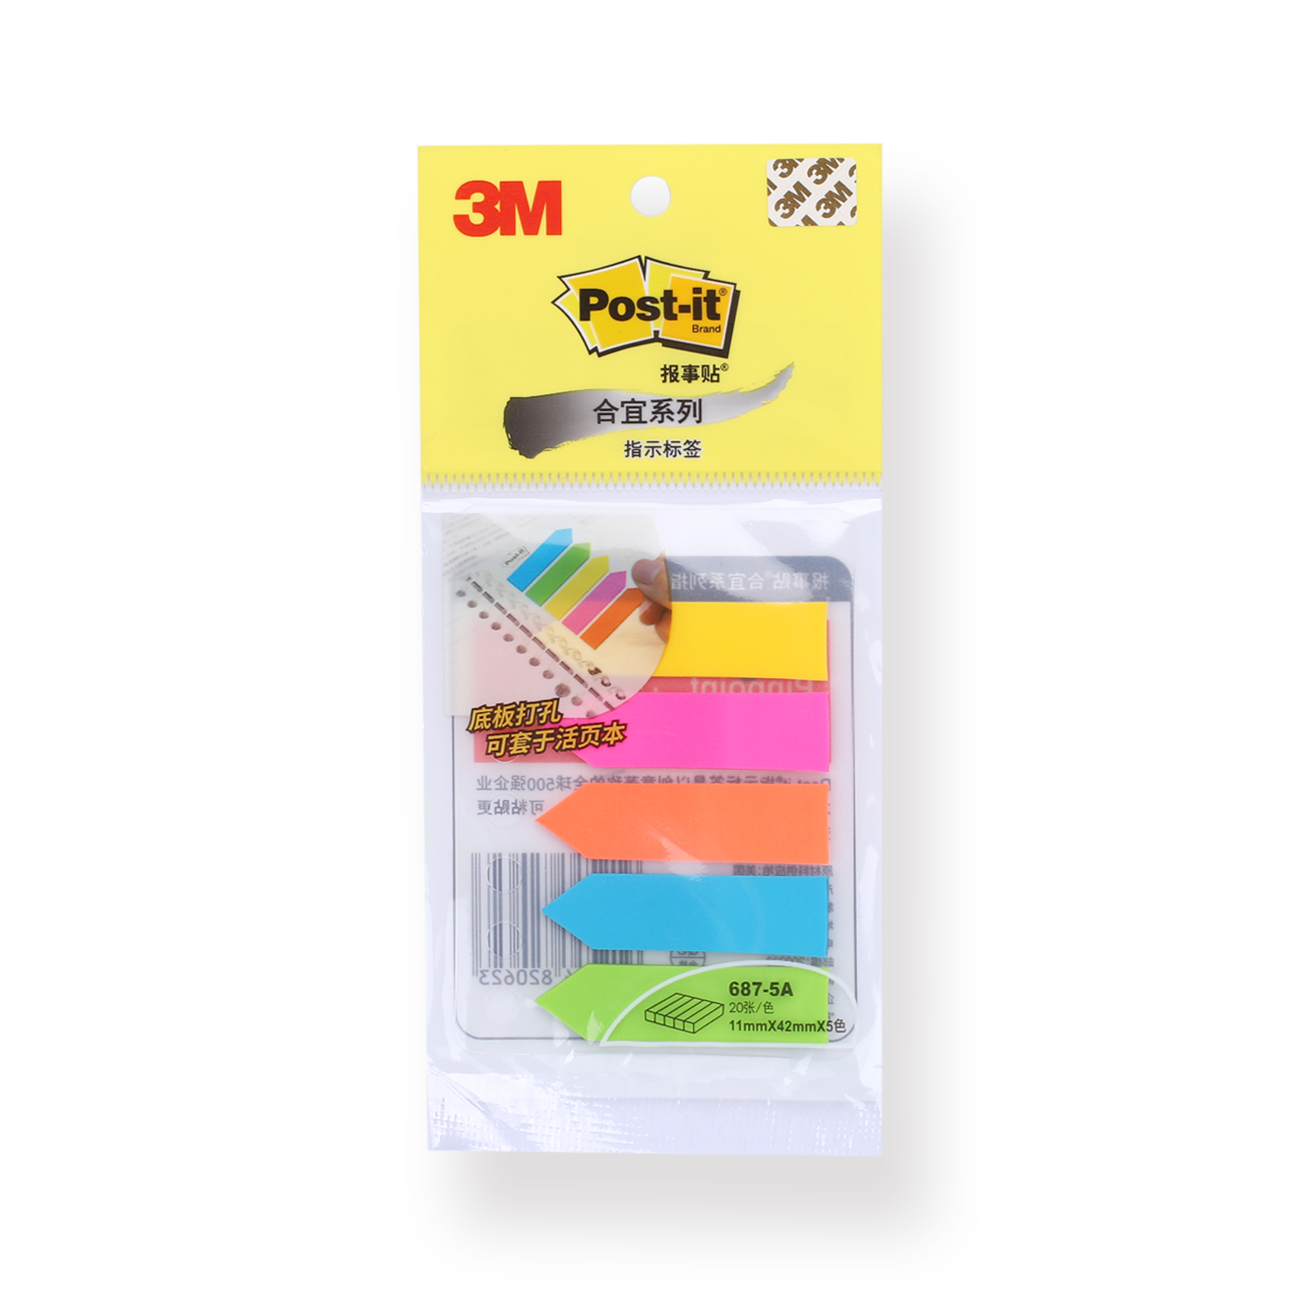 3M Post-it Fluorescence Index Flags - Stationery Pal